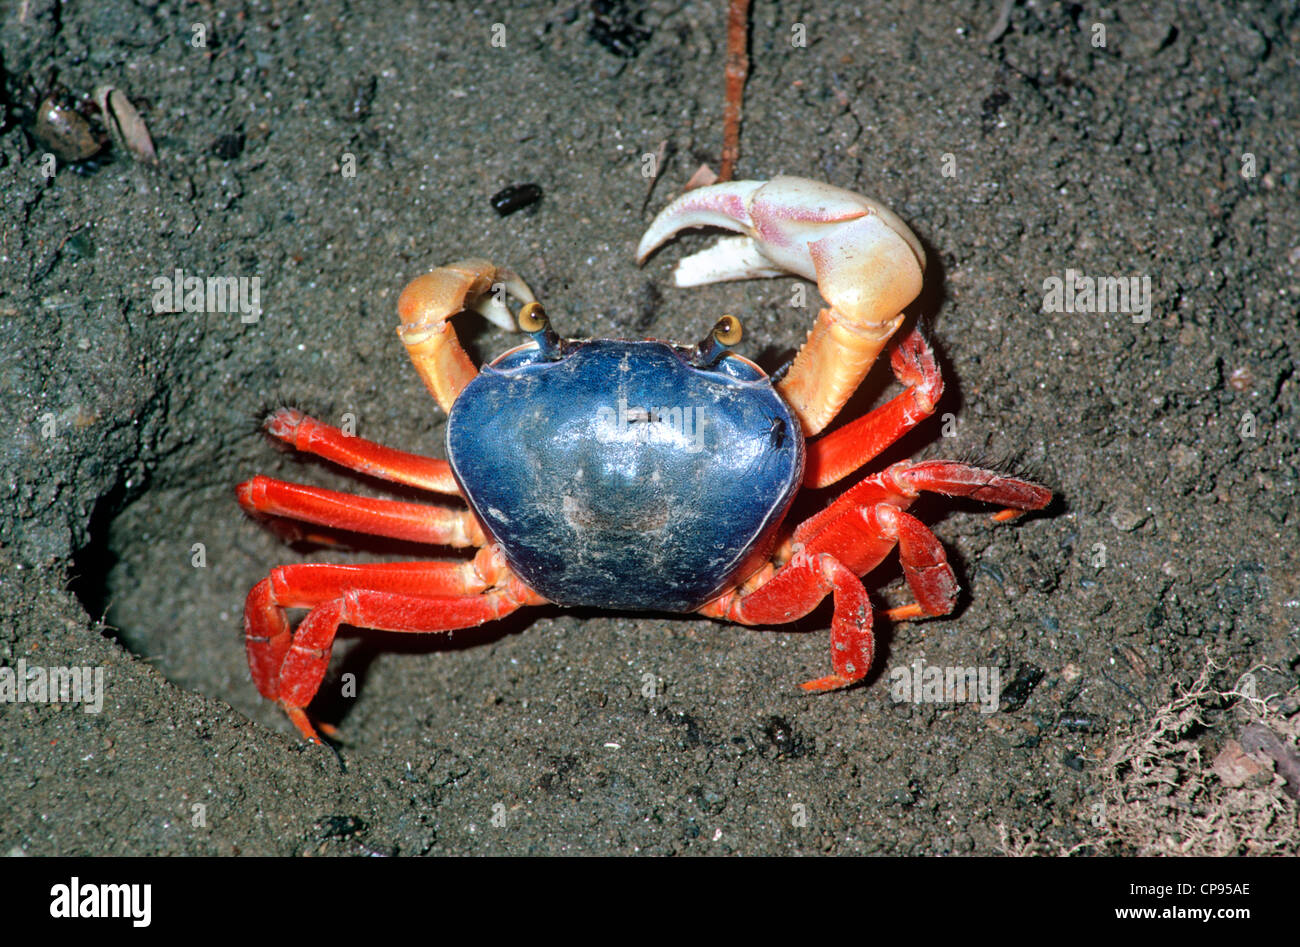 A mangrove crab (Ucides sp.) by its hole in a mangrove swamp Costa Rica Stock Photo